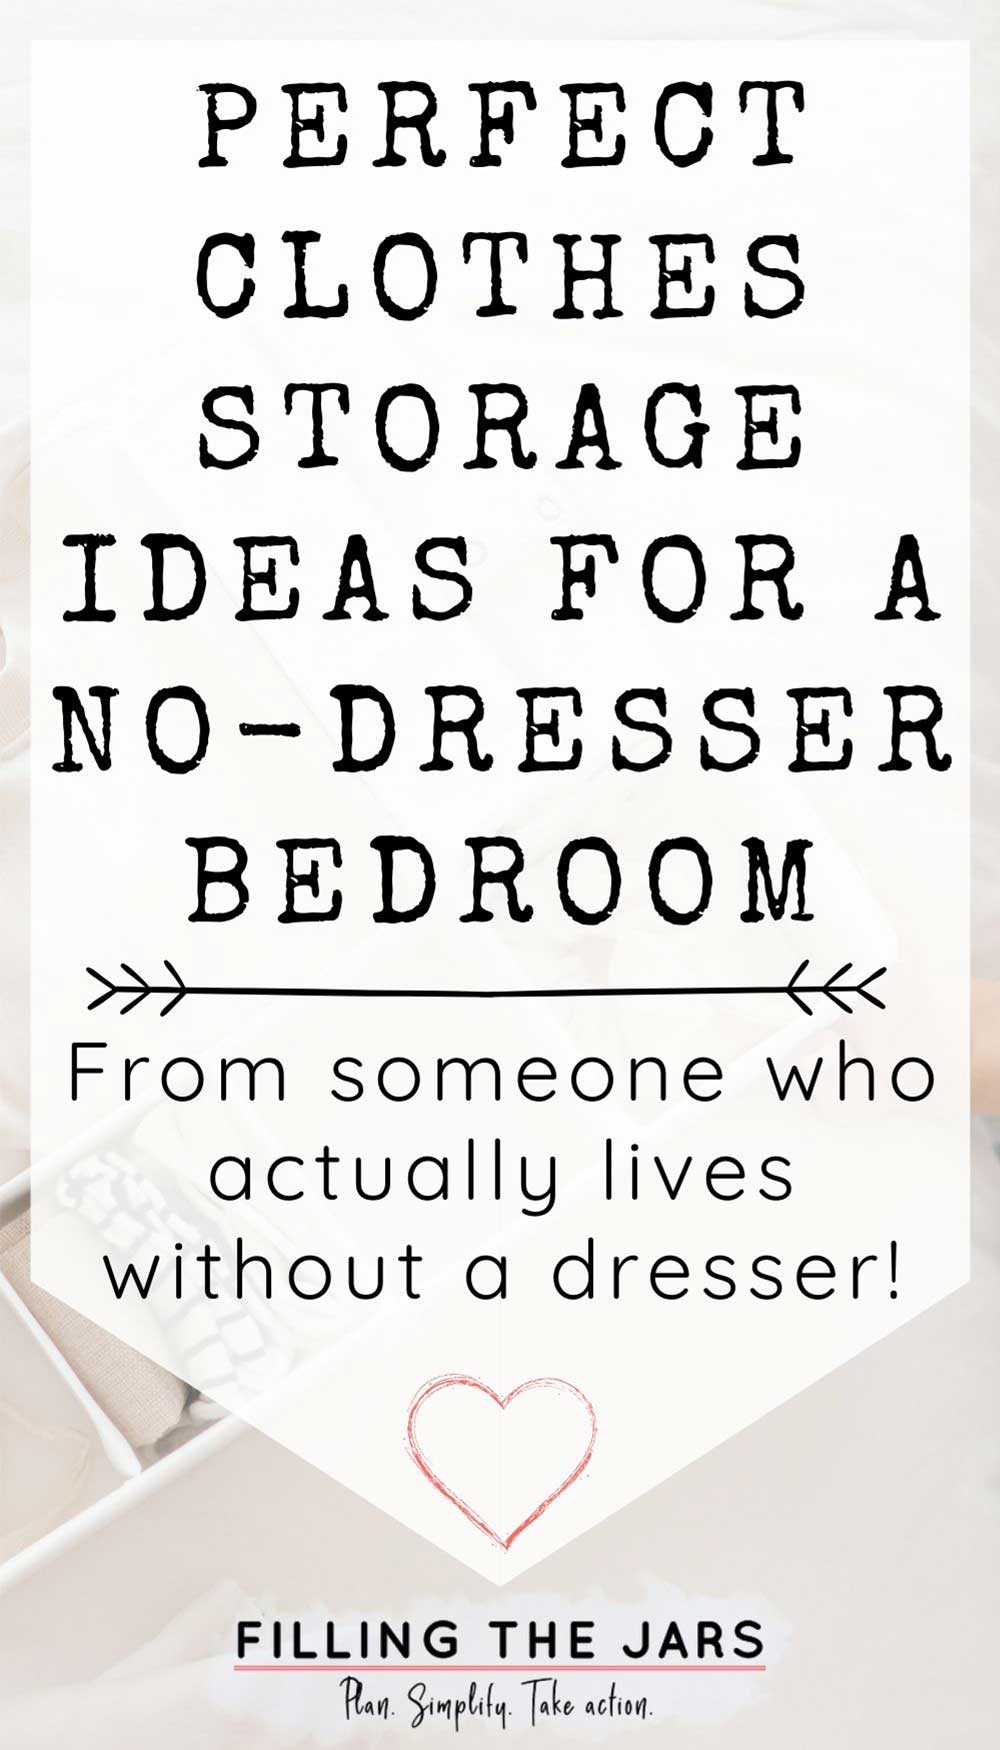 Text clothes storage ideas for a no-dresser bedroom on white background over image of organized clothes in a storage container on white bed.